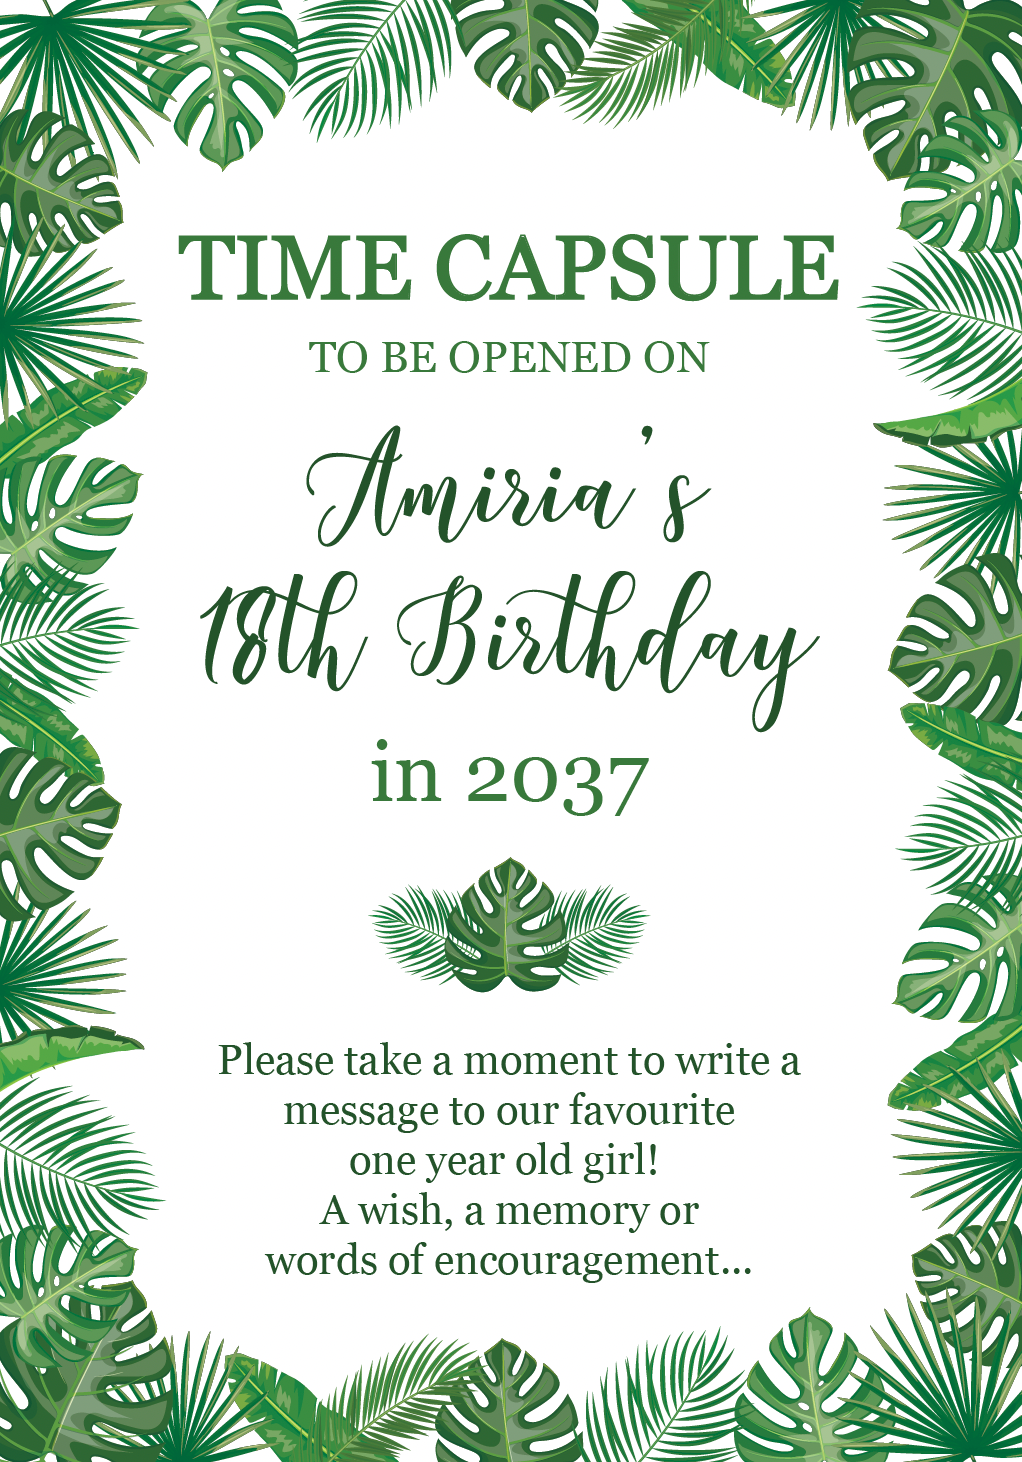 Takaro tribe themed time capsule poster